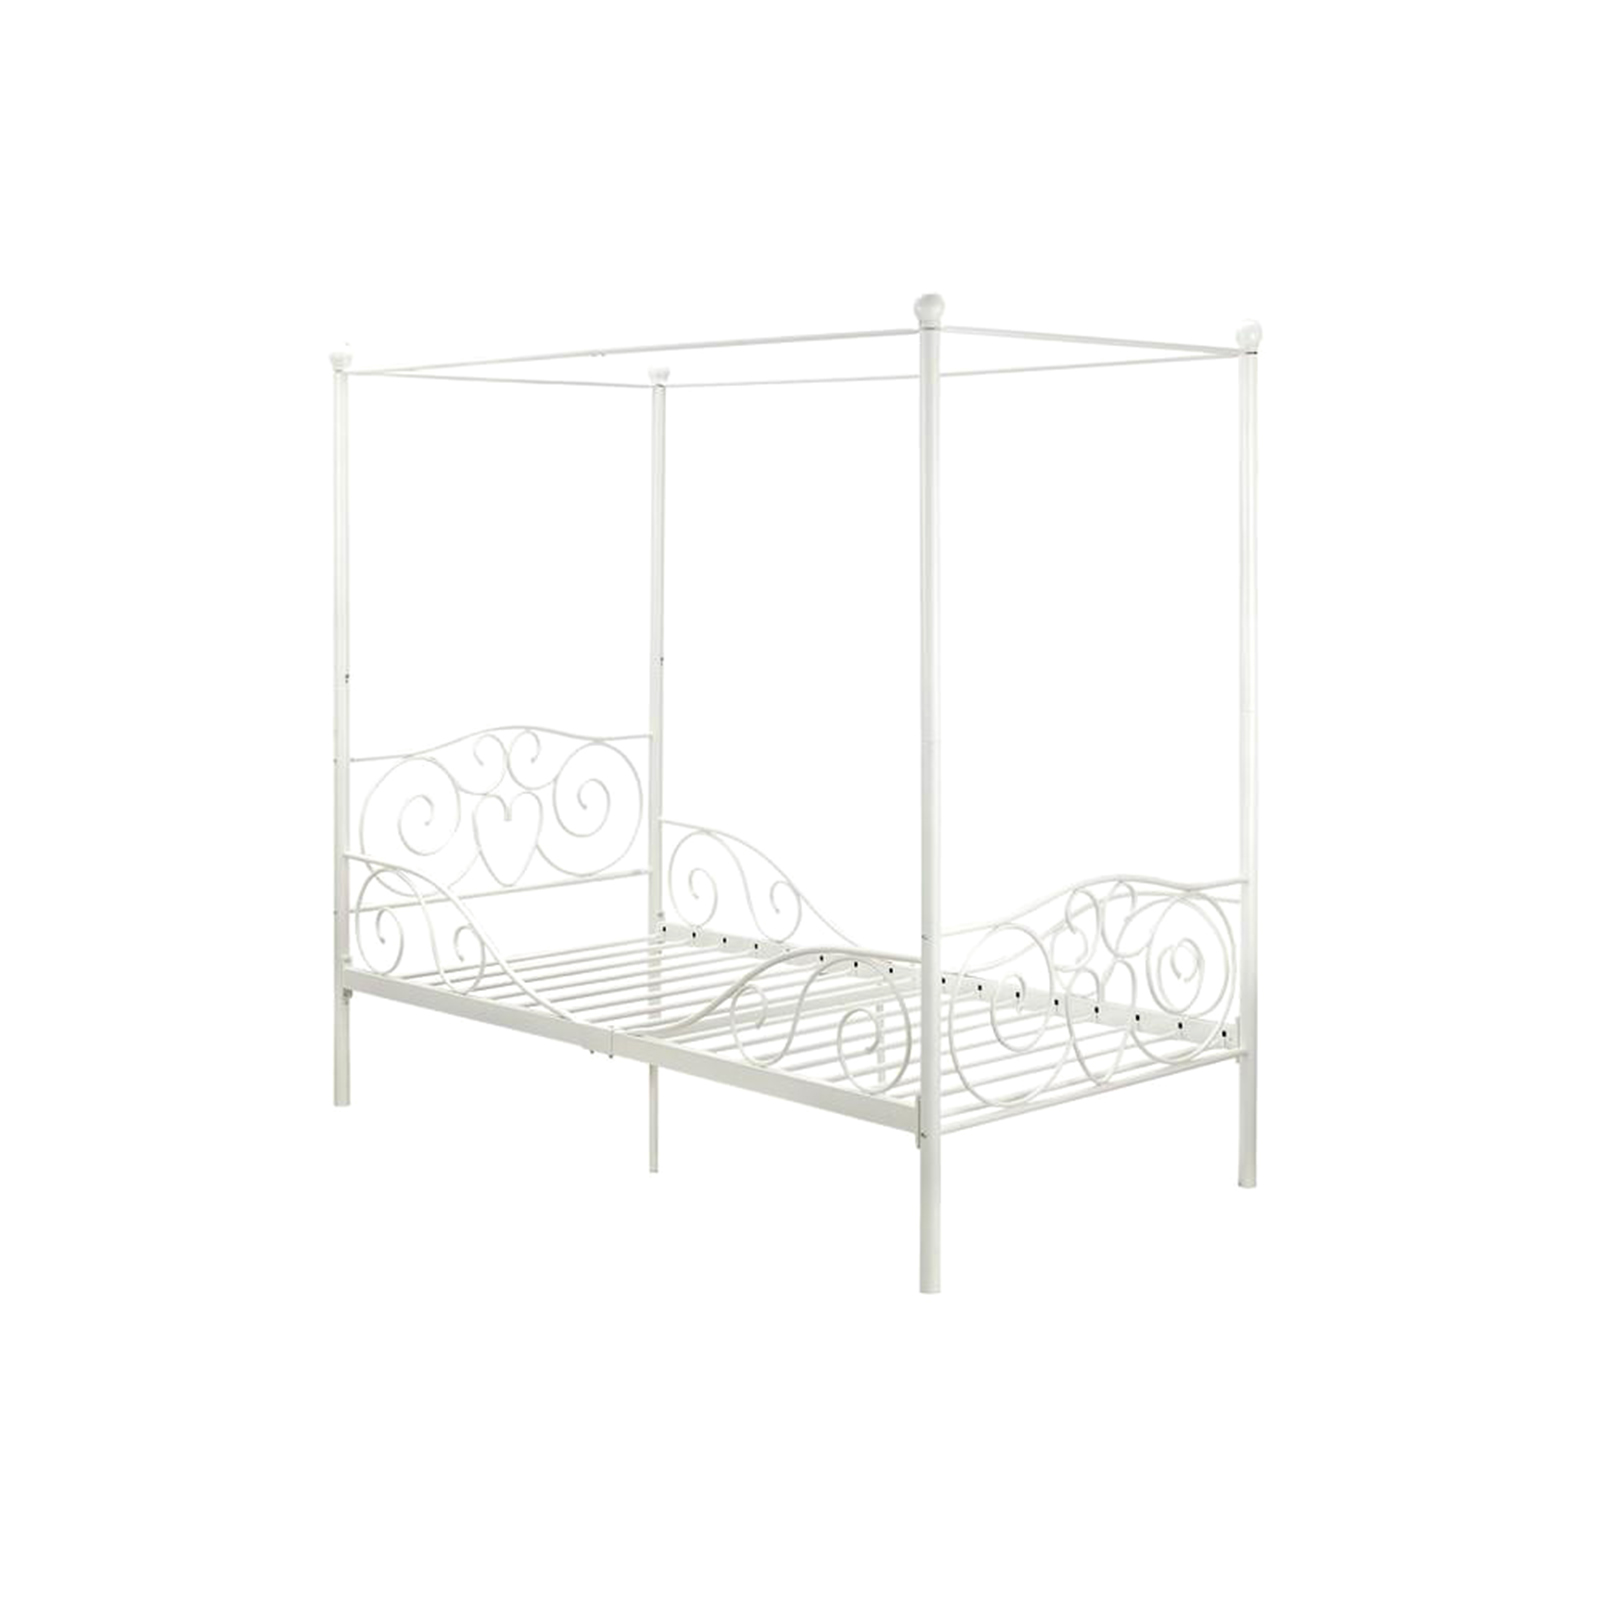 Dorel 41.5" Canopy Metal Twin Bed - White